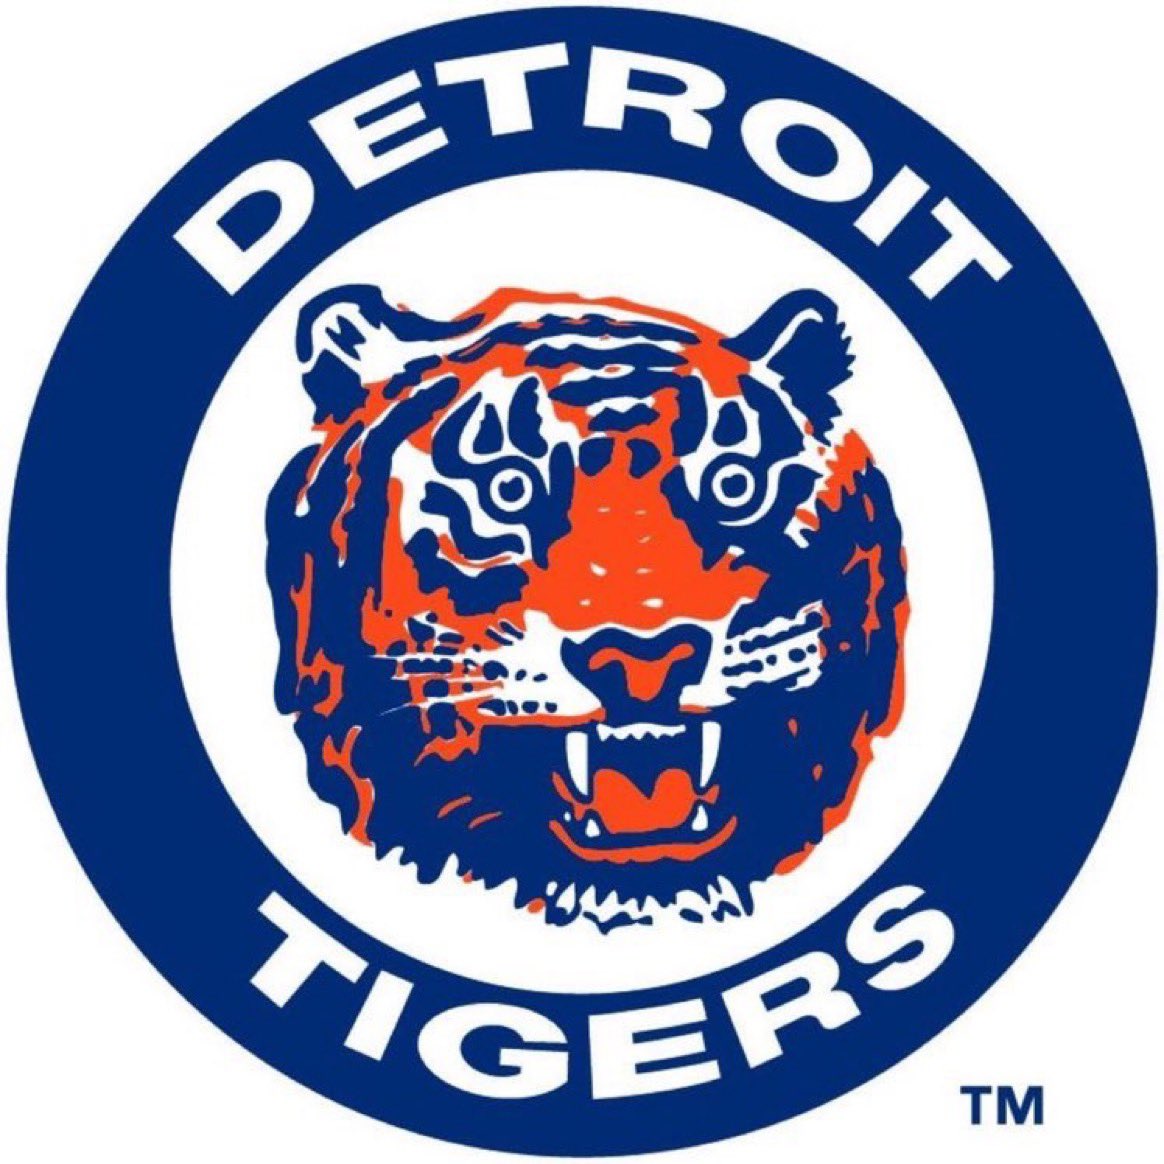 I still consider this sweet bastard obviously tripping balls the real Detroit Tigers logo.